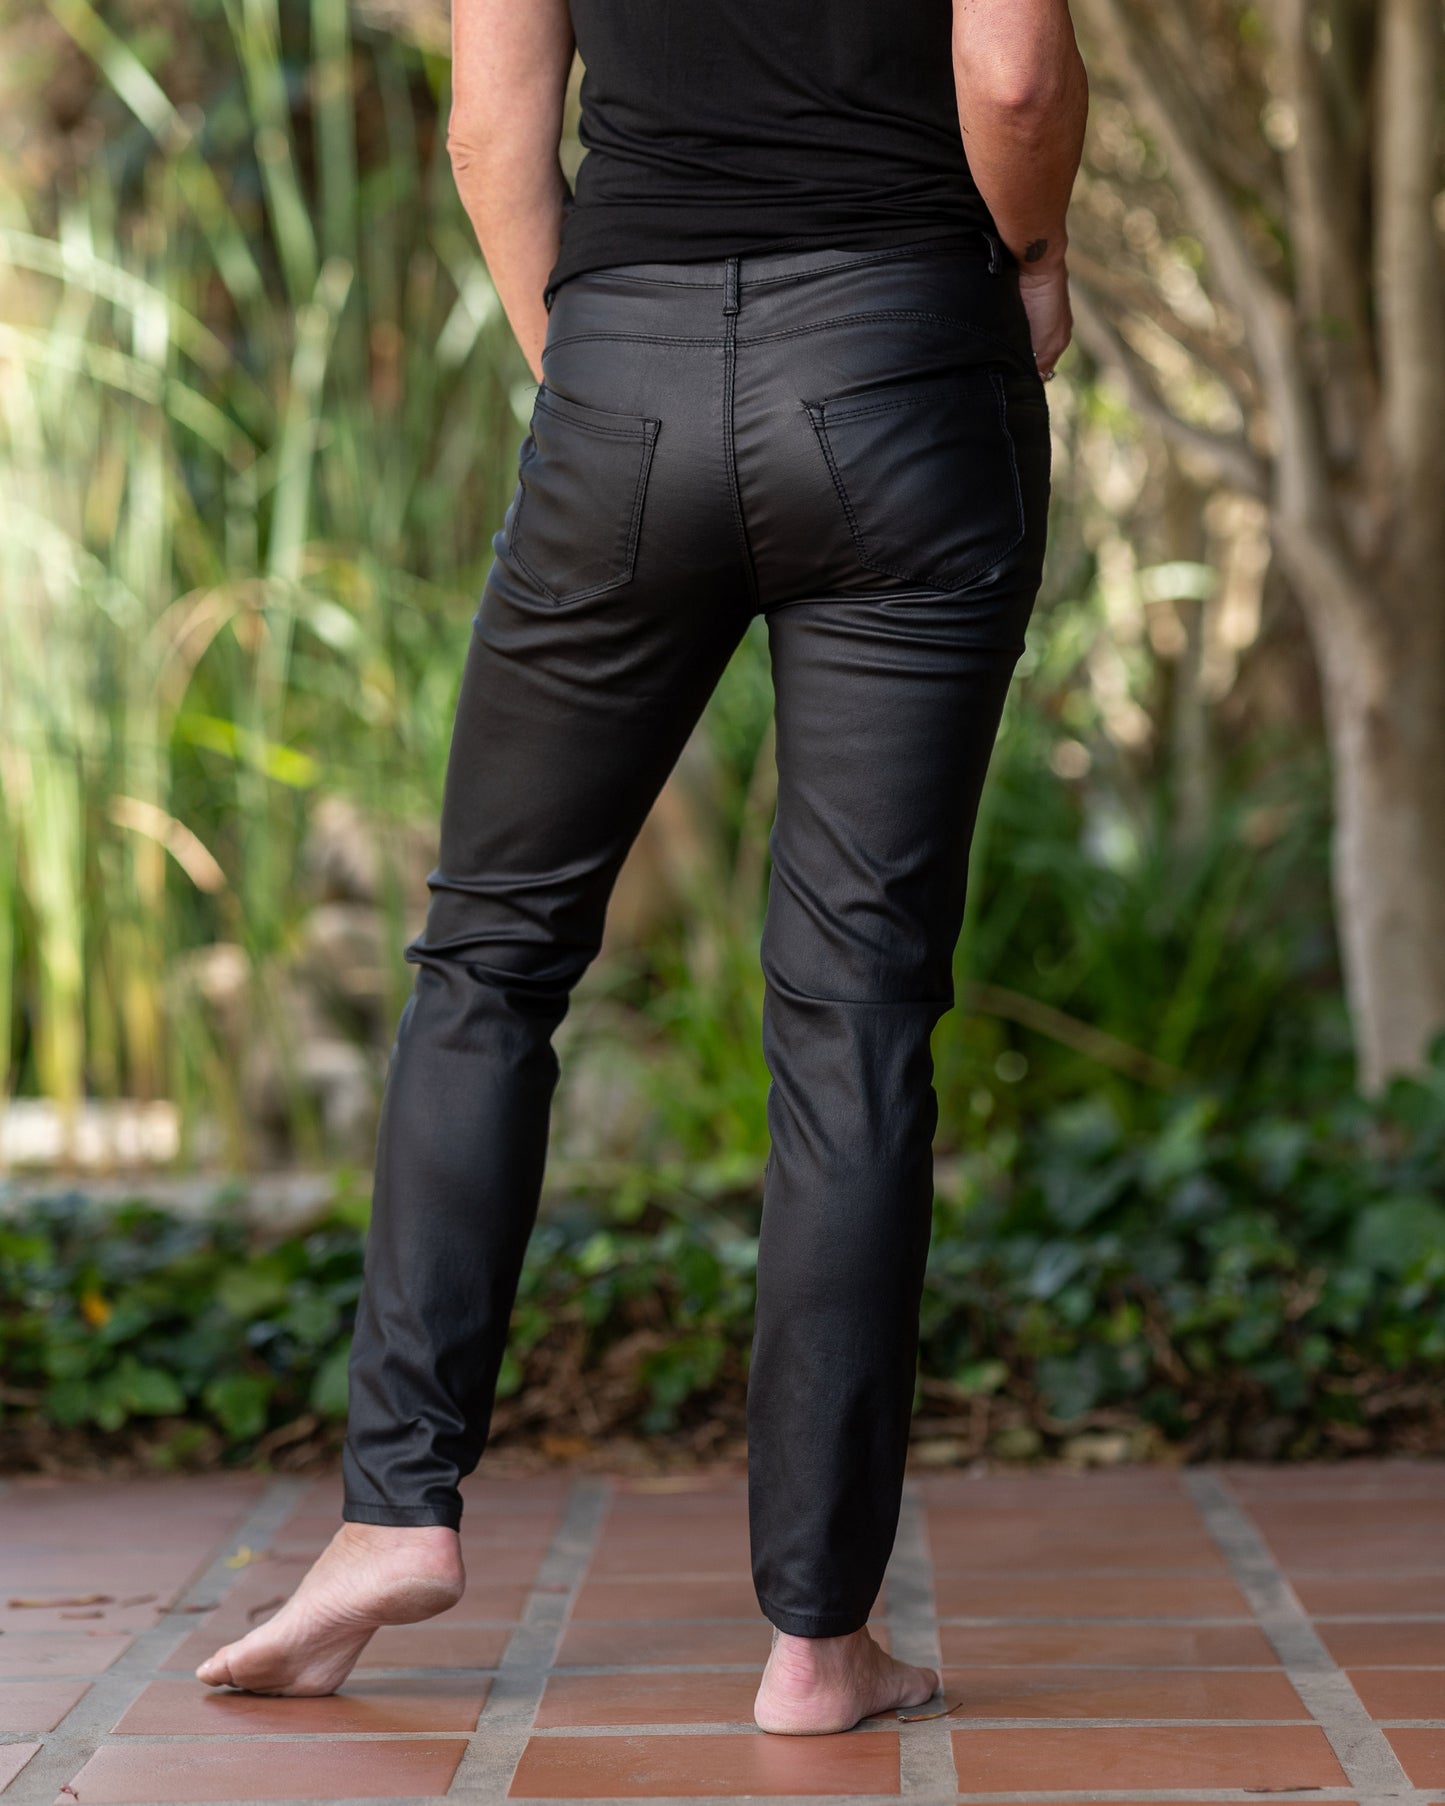 When you think about pleather pants, comfort is not necessarily the first word that comes to mind. However, these pants offers exceptional comfort and fit. And on top of that, such a stunning addition to your wardrobe. They feature a mid rise and straight cut style. You can choose your normal SA sizing in these 